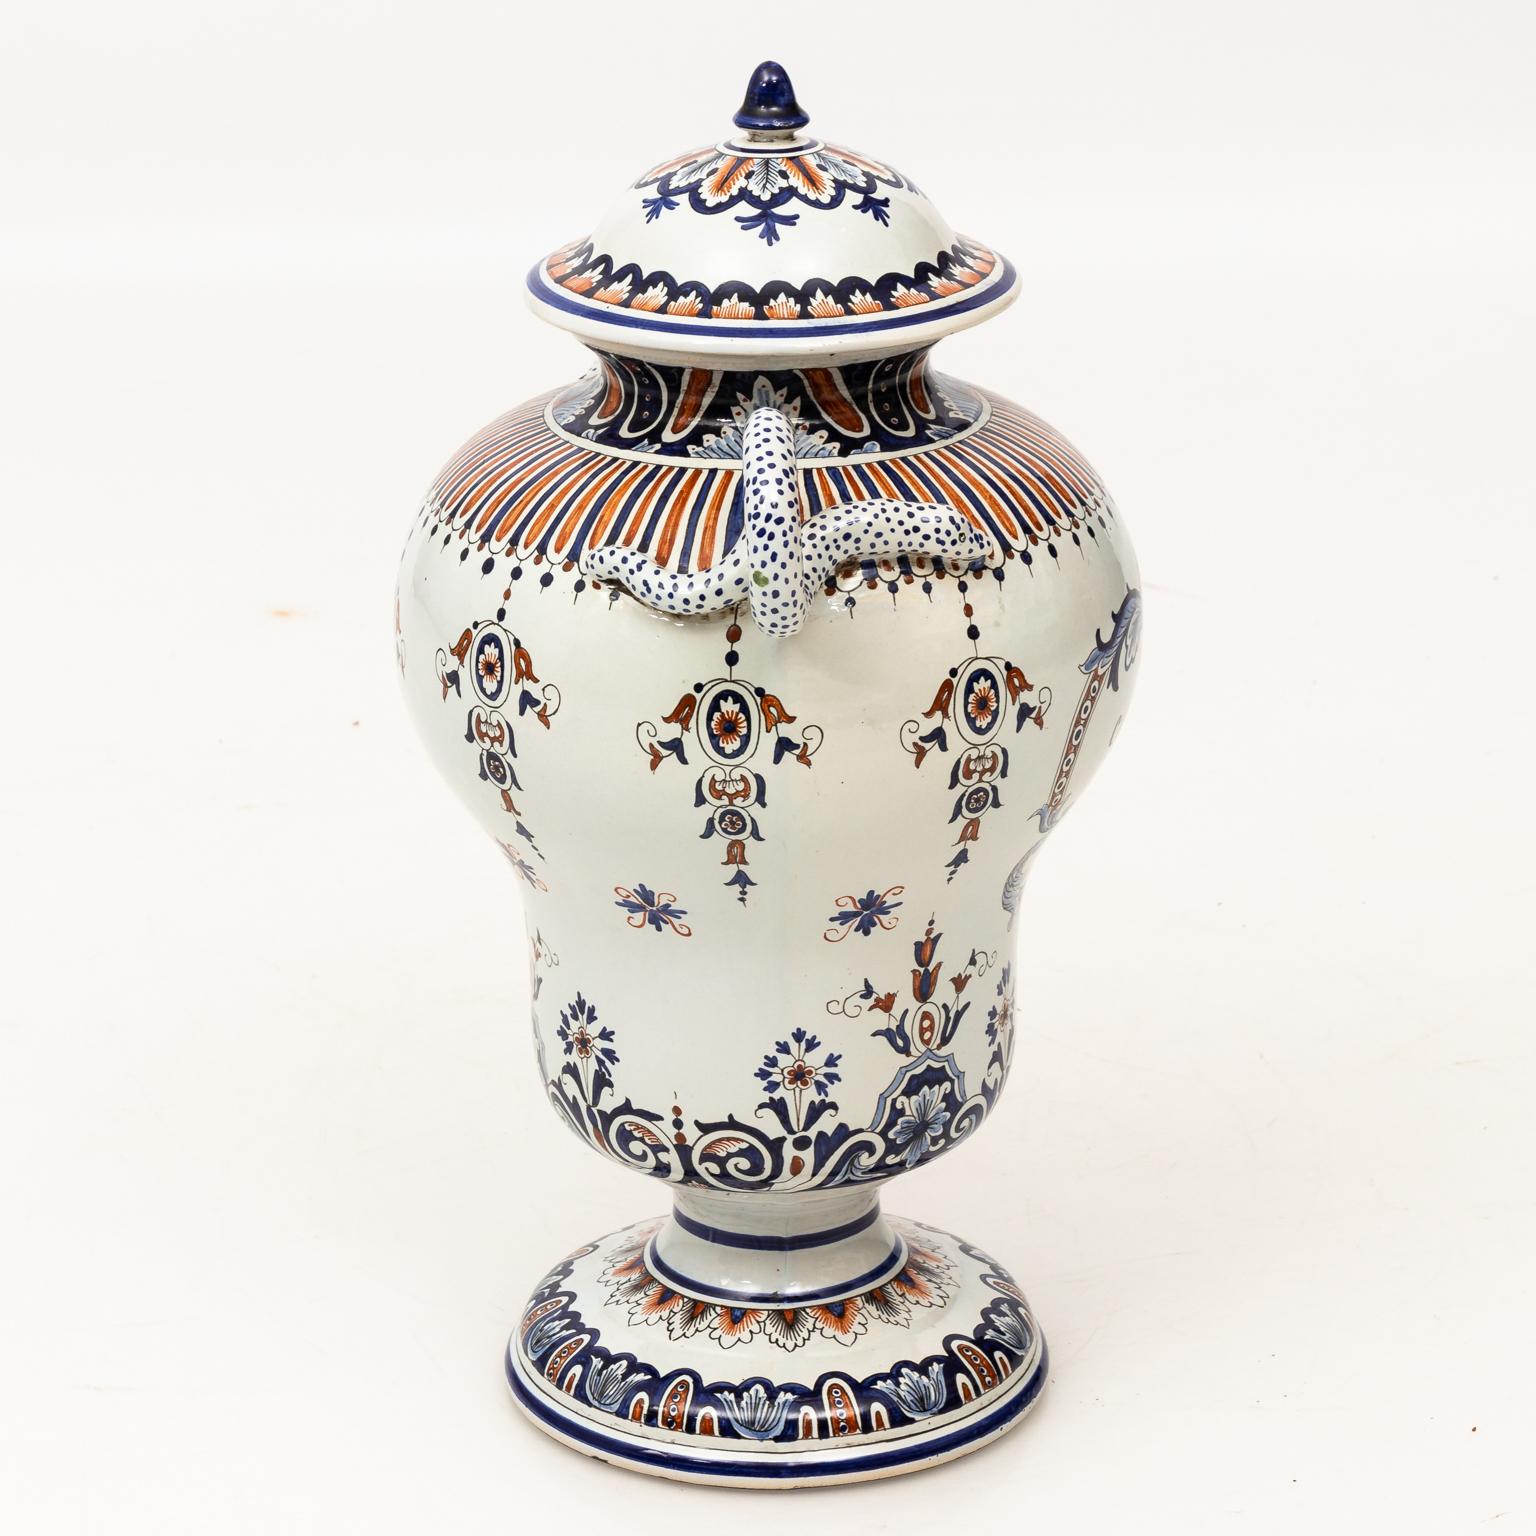 French covered jar with painted detail that features coiled snakes as handles and a custom label for 